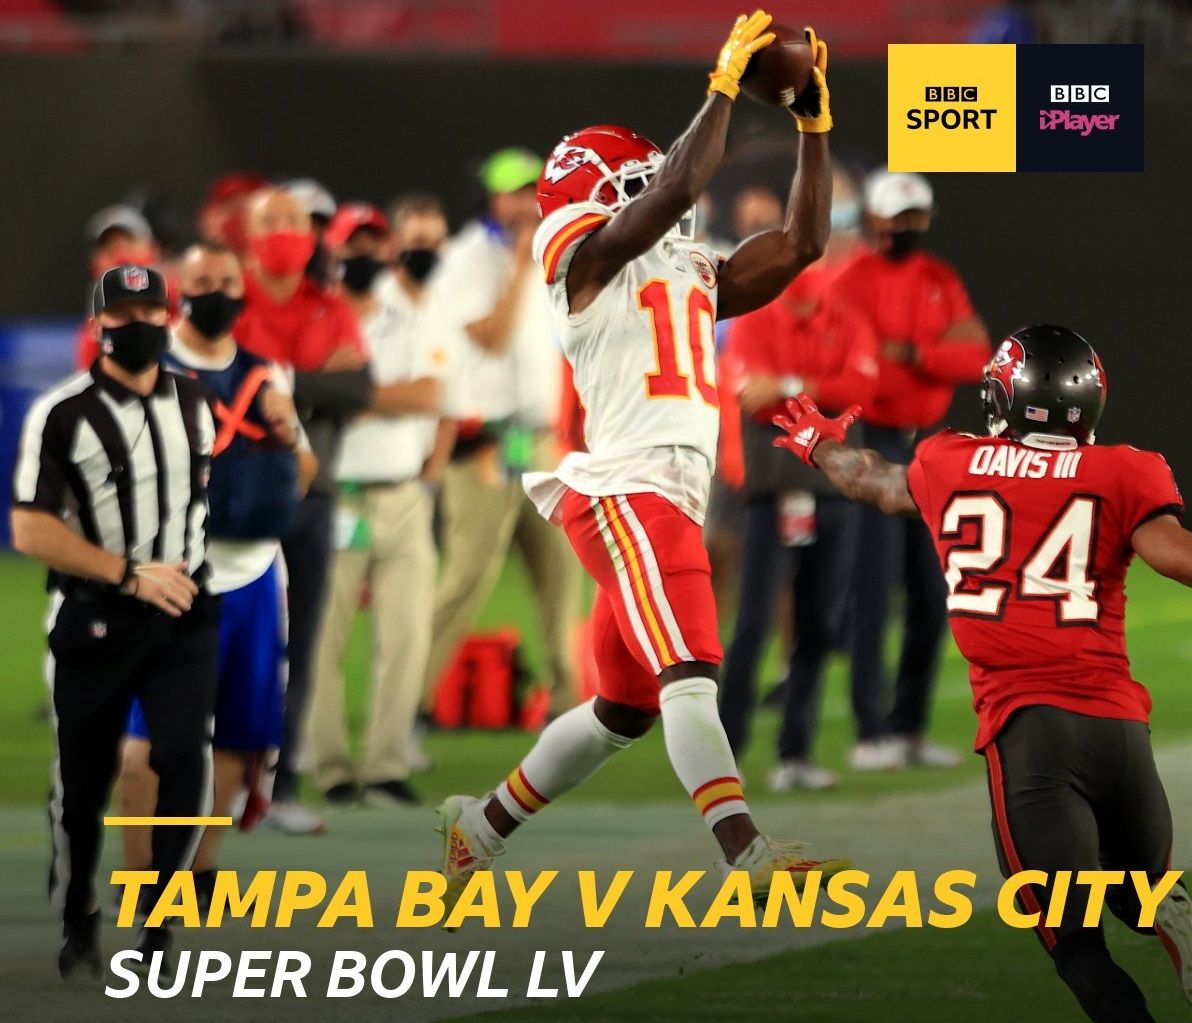 How to Watch the 2021 Super Bowl LV With or Without Cable